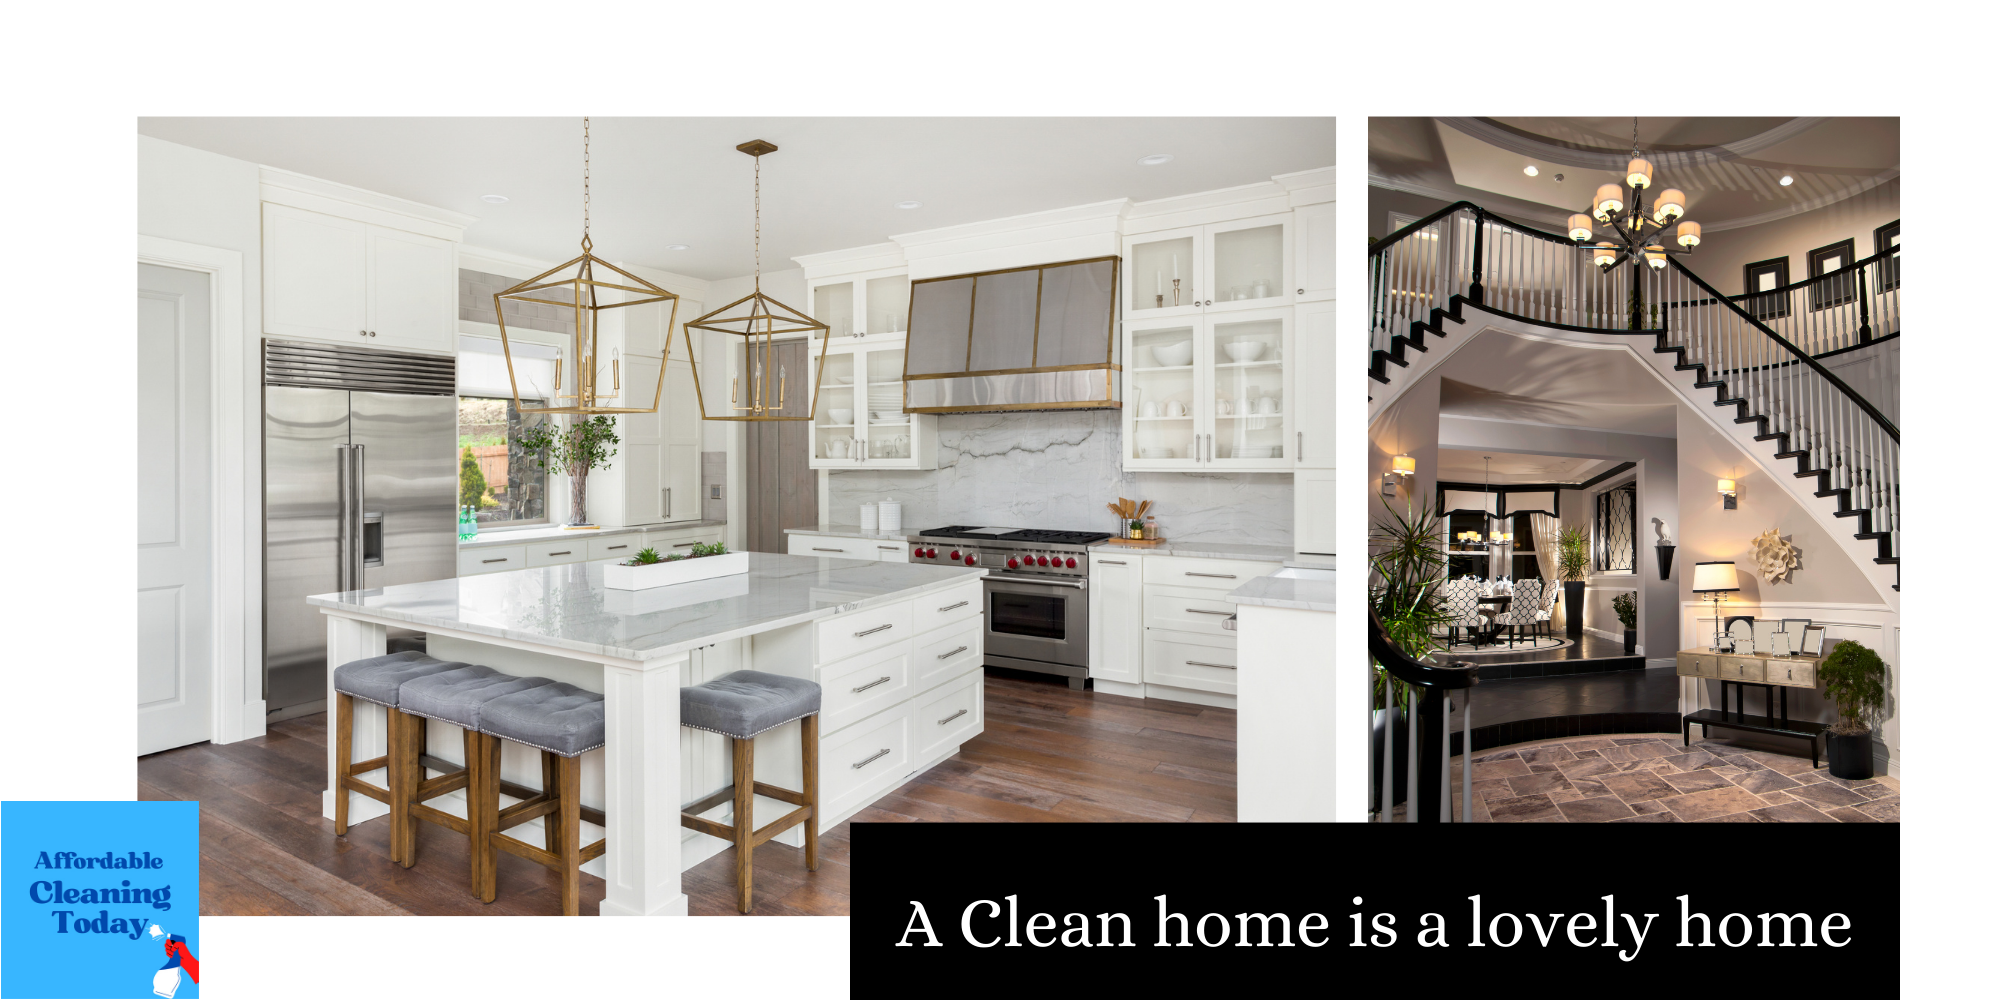 Love-infused Living - A Clean home is a lovely home